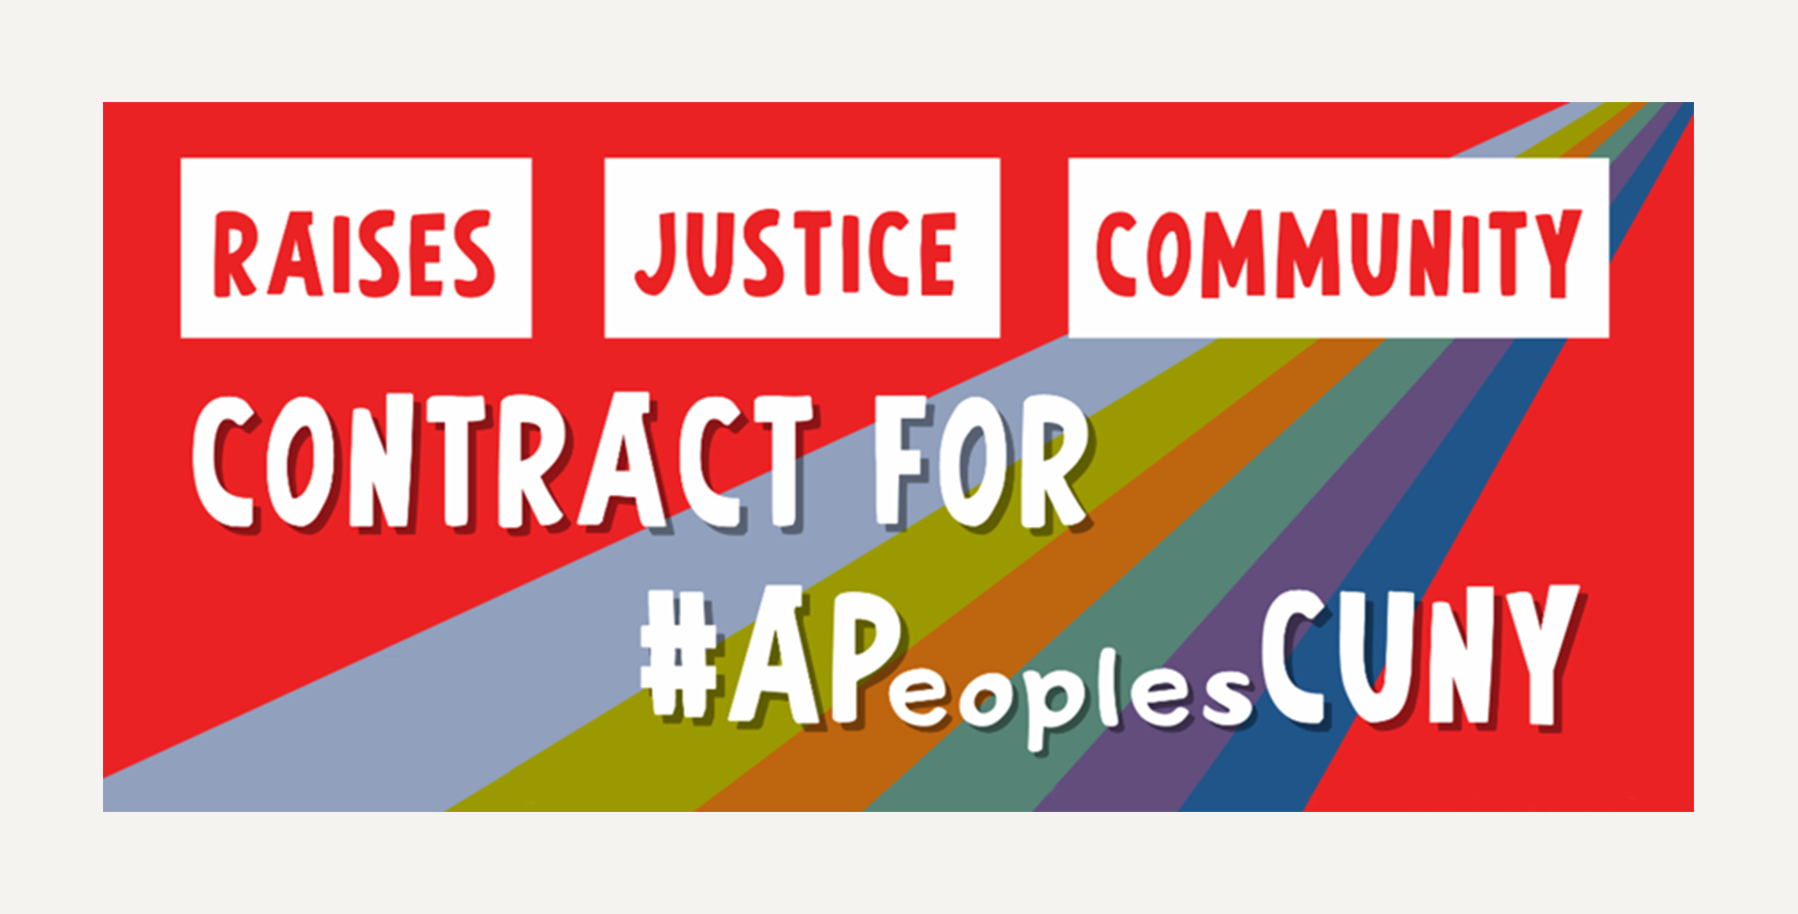 Contract-for-A-Peoples-CUNY_slider_no footer